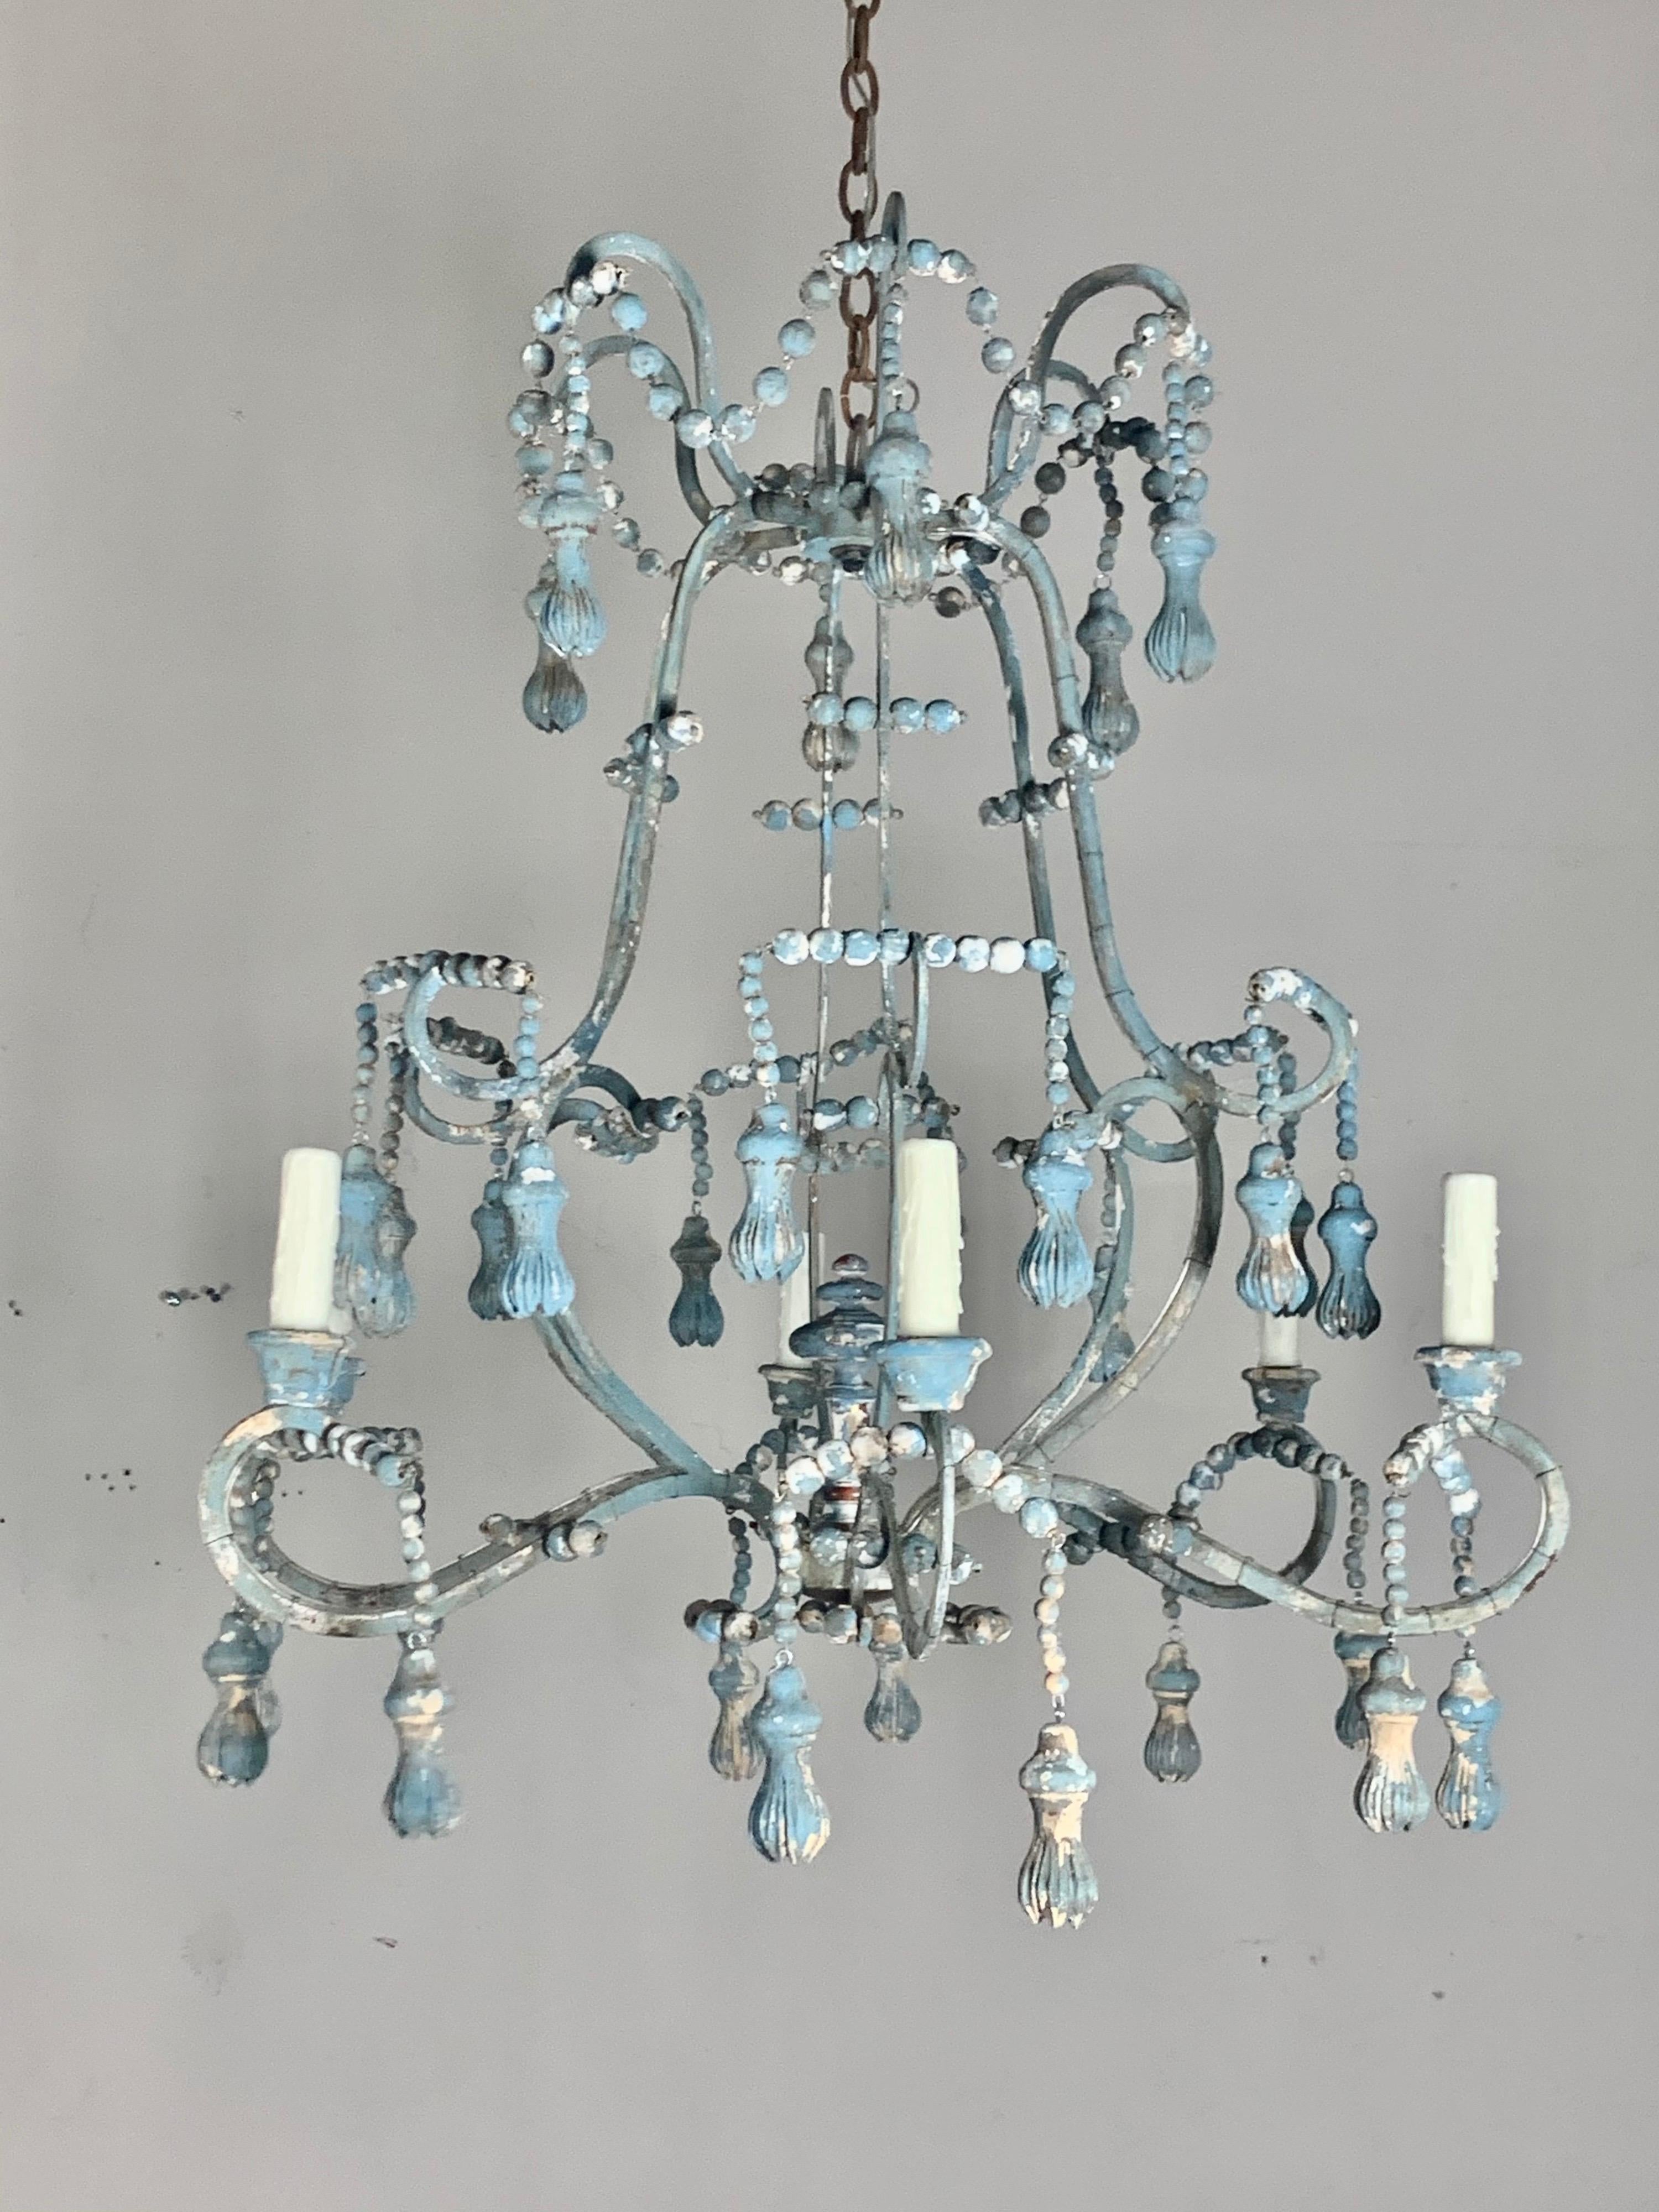 Hand crafted wood & metal painted 6-light chandelier with wood beads and unique carved tassels hanging throughout. The hand painted finish is done over time in the antique artisan style. We can also make this fixture in a natural wood, silver, gold